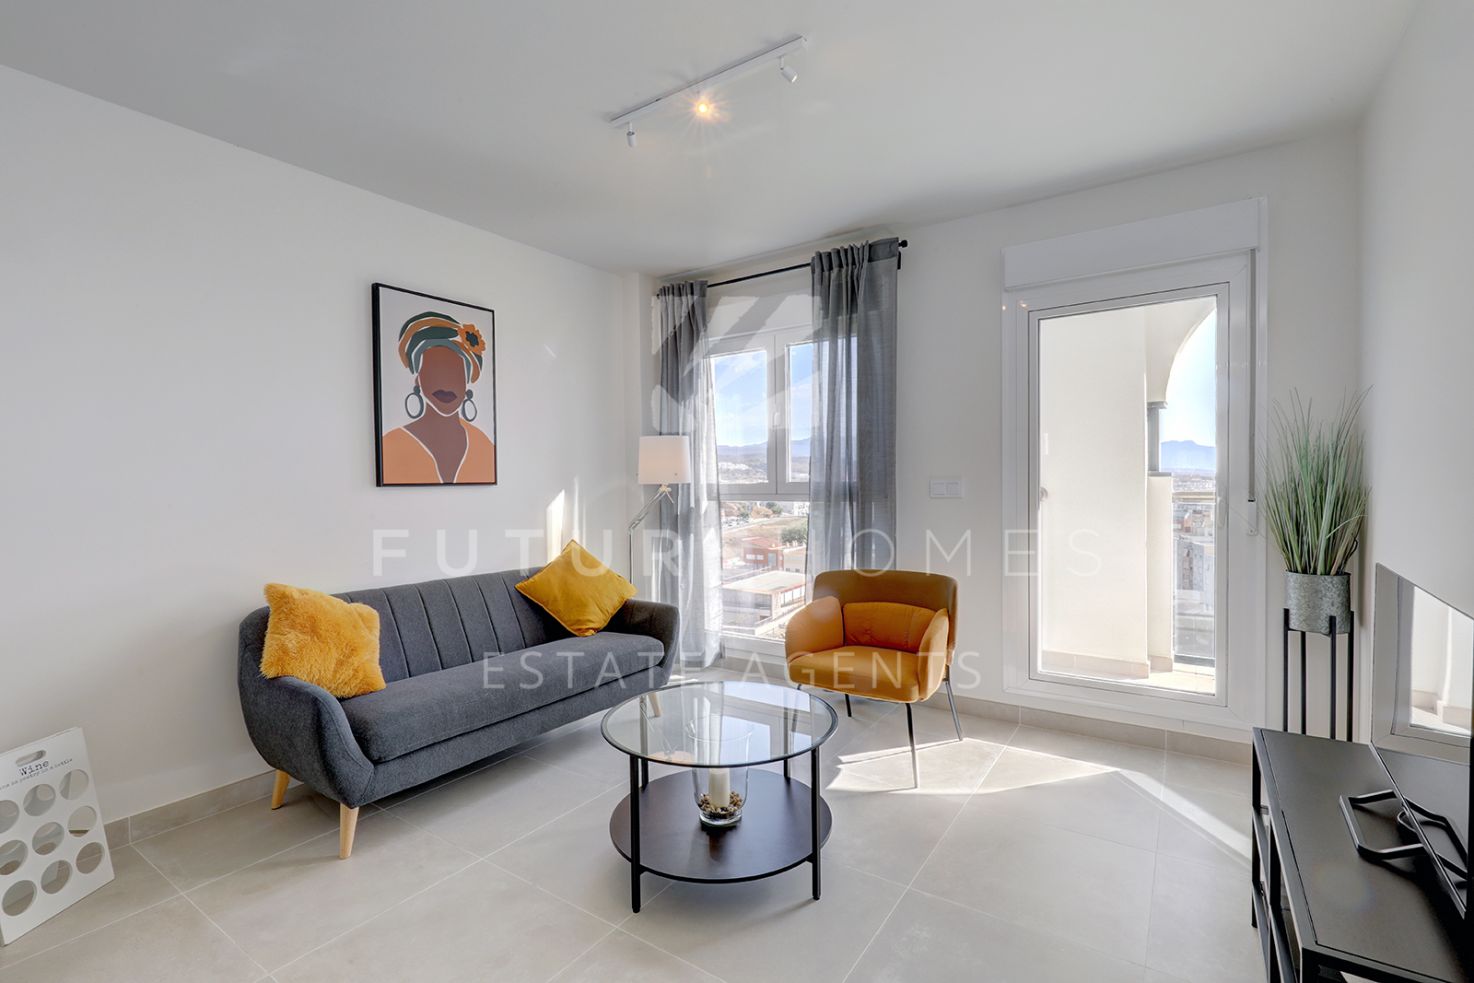 Spacious and immaculate apartment with super views in the heart of Estepona port